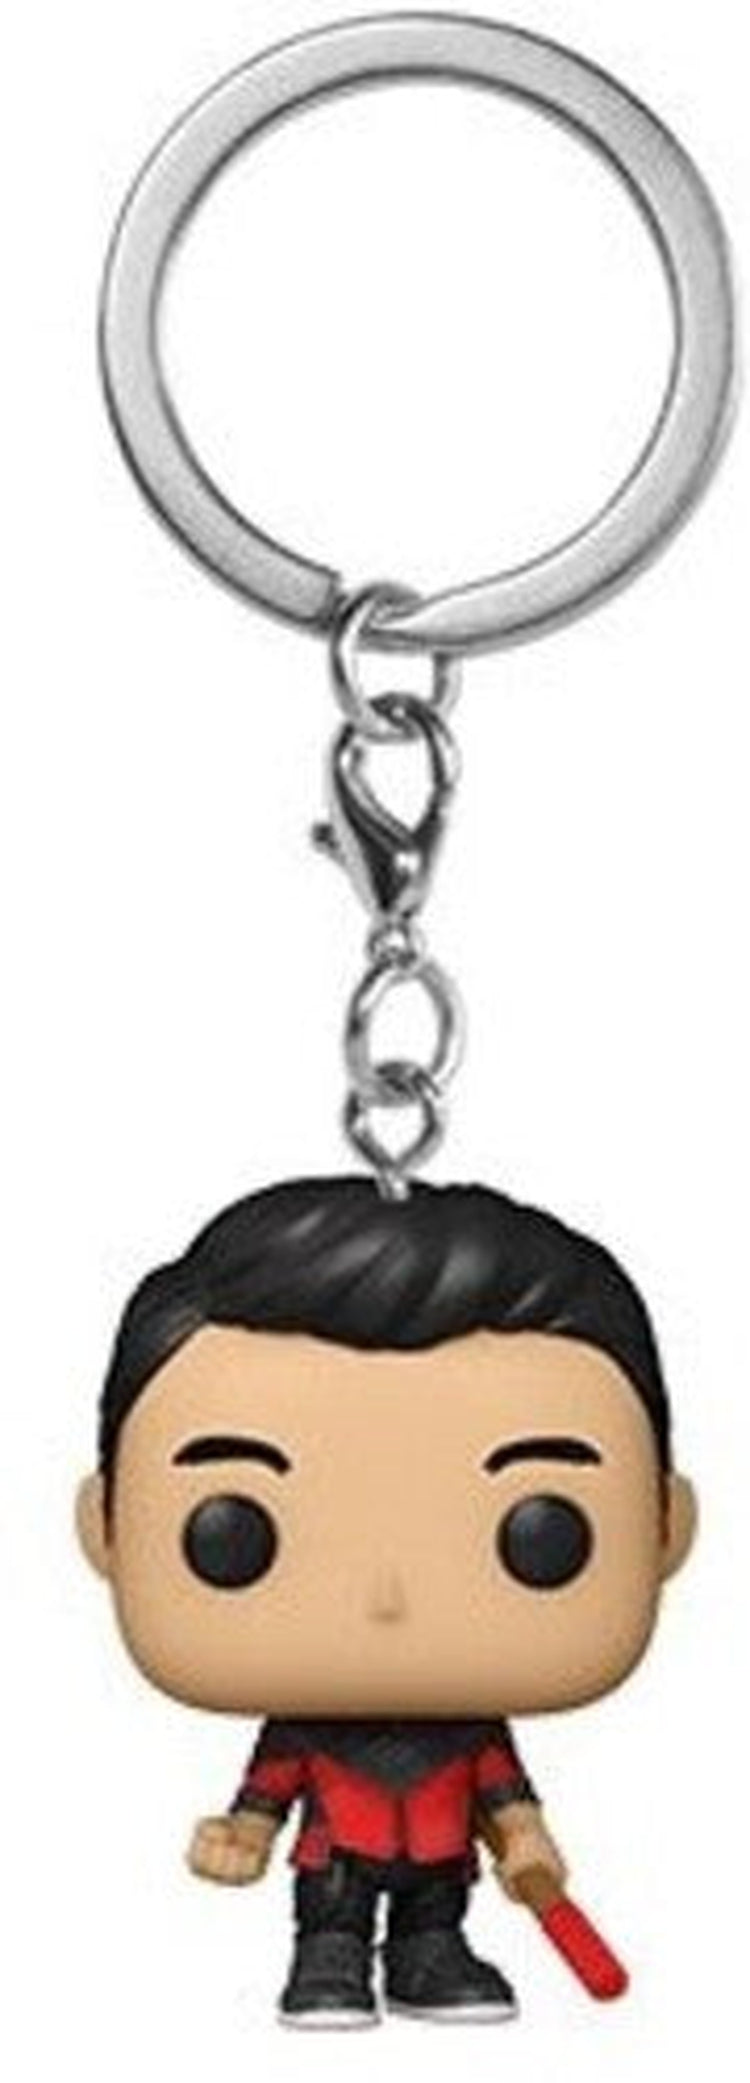 FUNKO POP! KEYCHAIN: Shang - Chi and the Legend of the Ten Rings - Shang - Chi